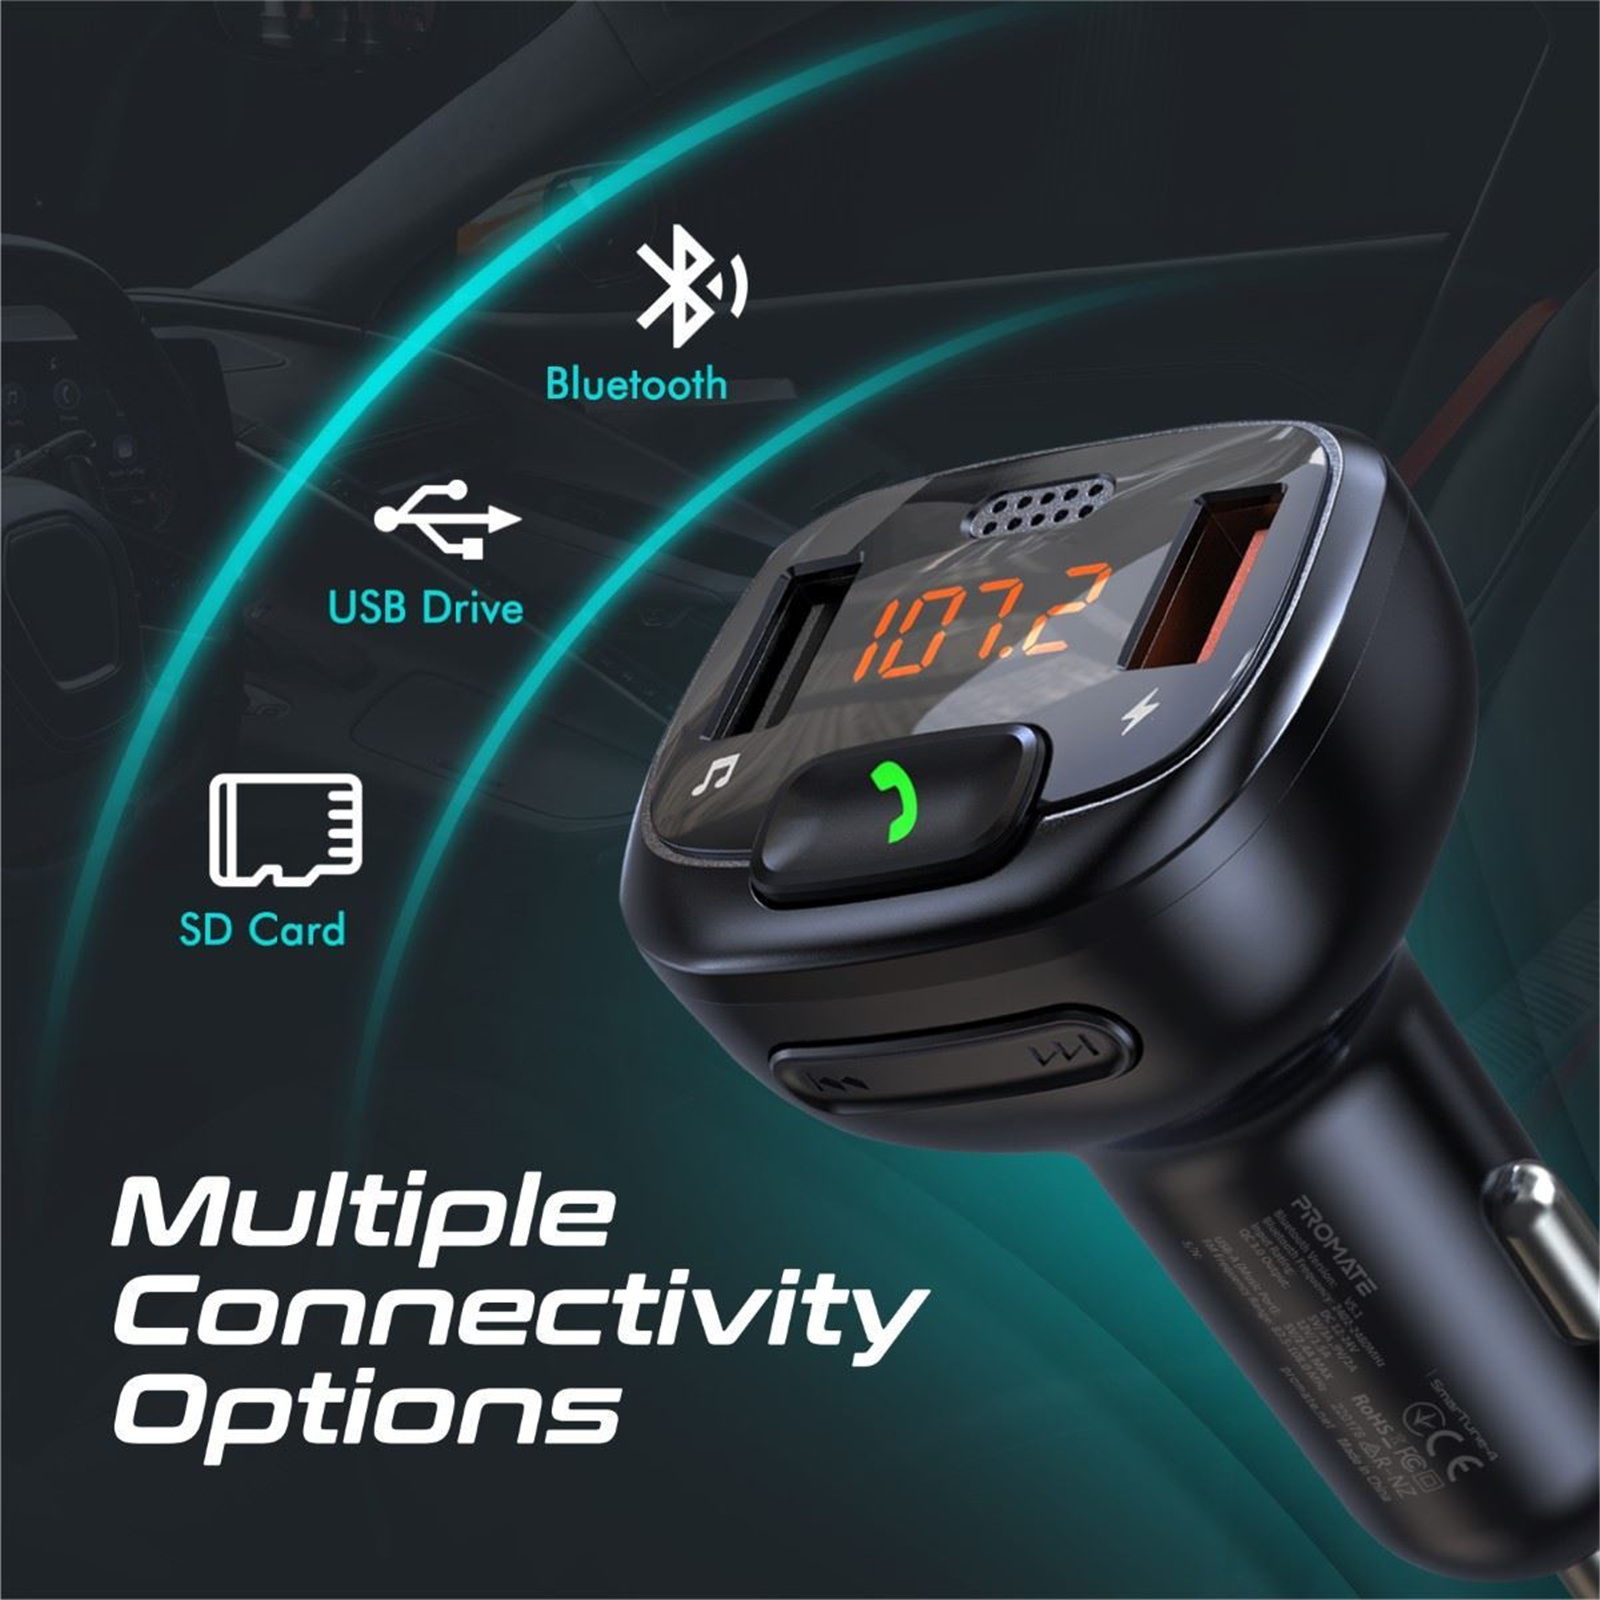 Promate SMARTUNE-4 Wirless In-Car FM Transmitter with Handsfree & QC3.0.  Bult-in Mic, Bluetooth, SD CardSlot, Frequency Range 87.5-108MHz, Output